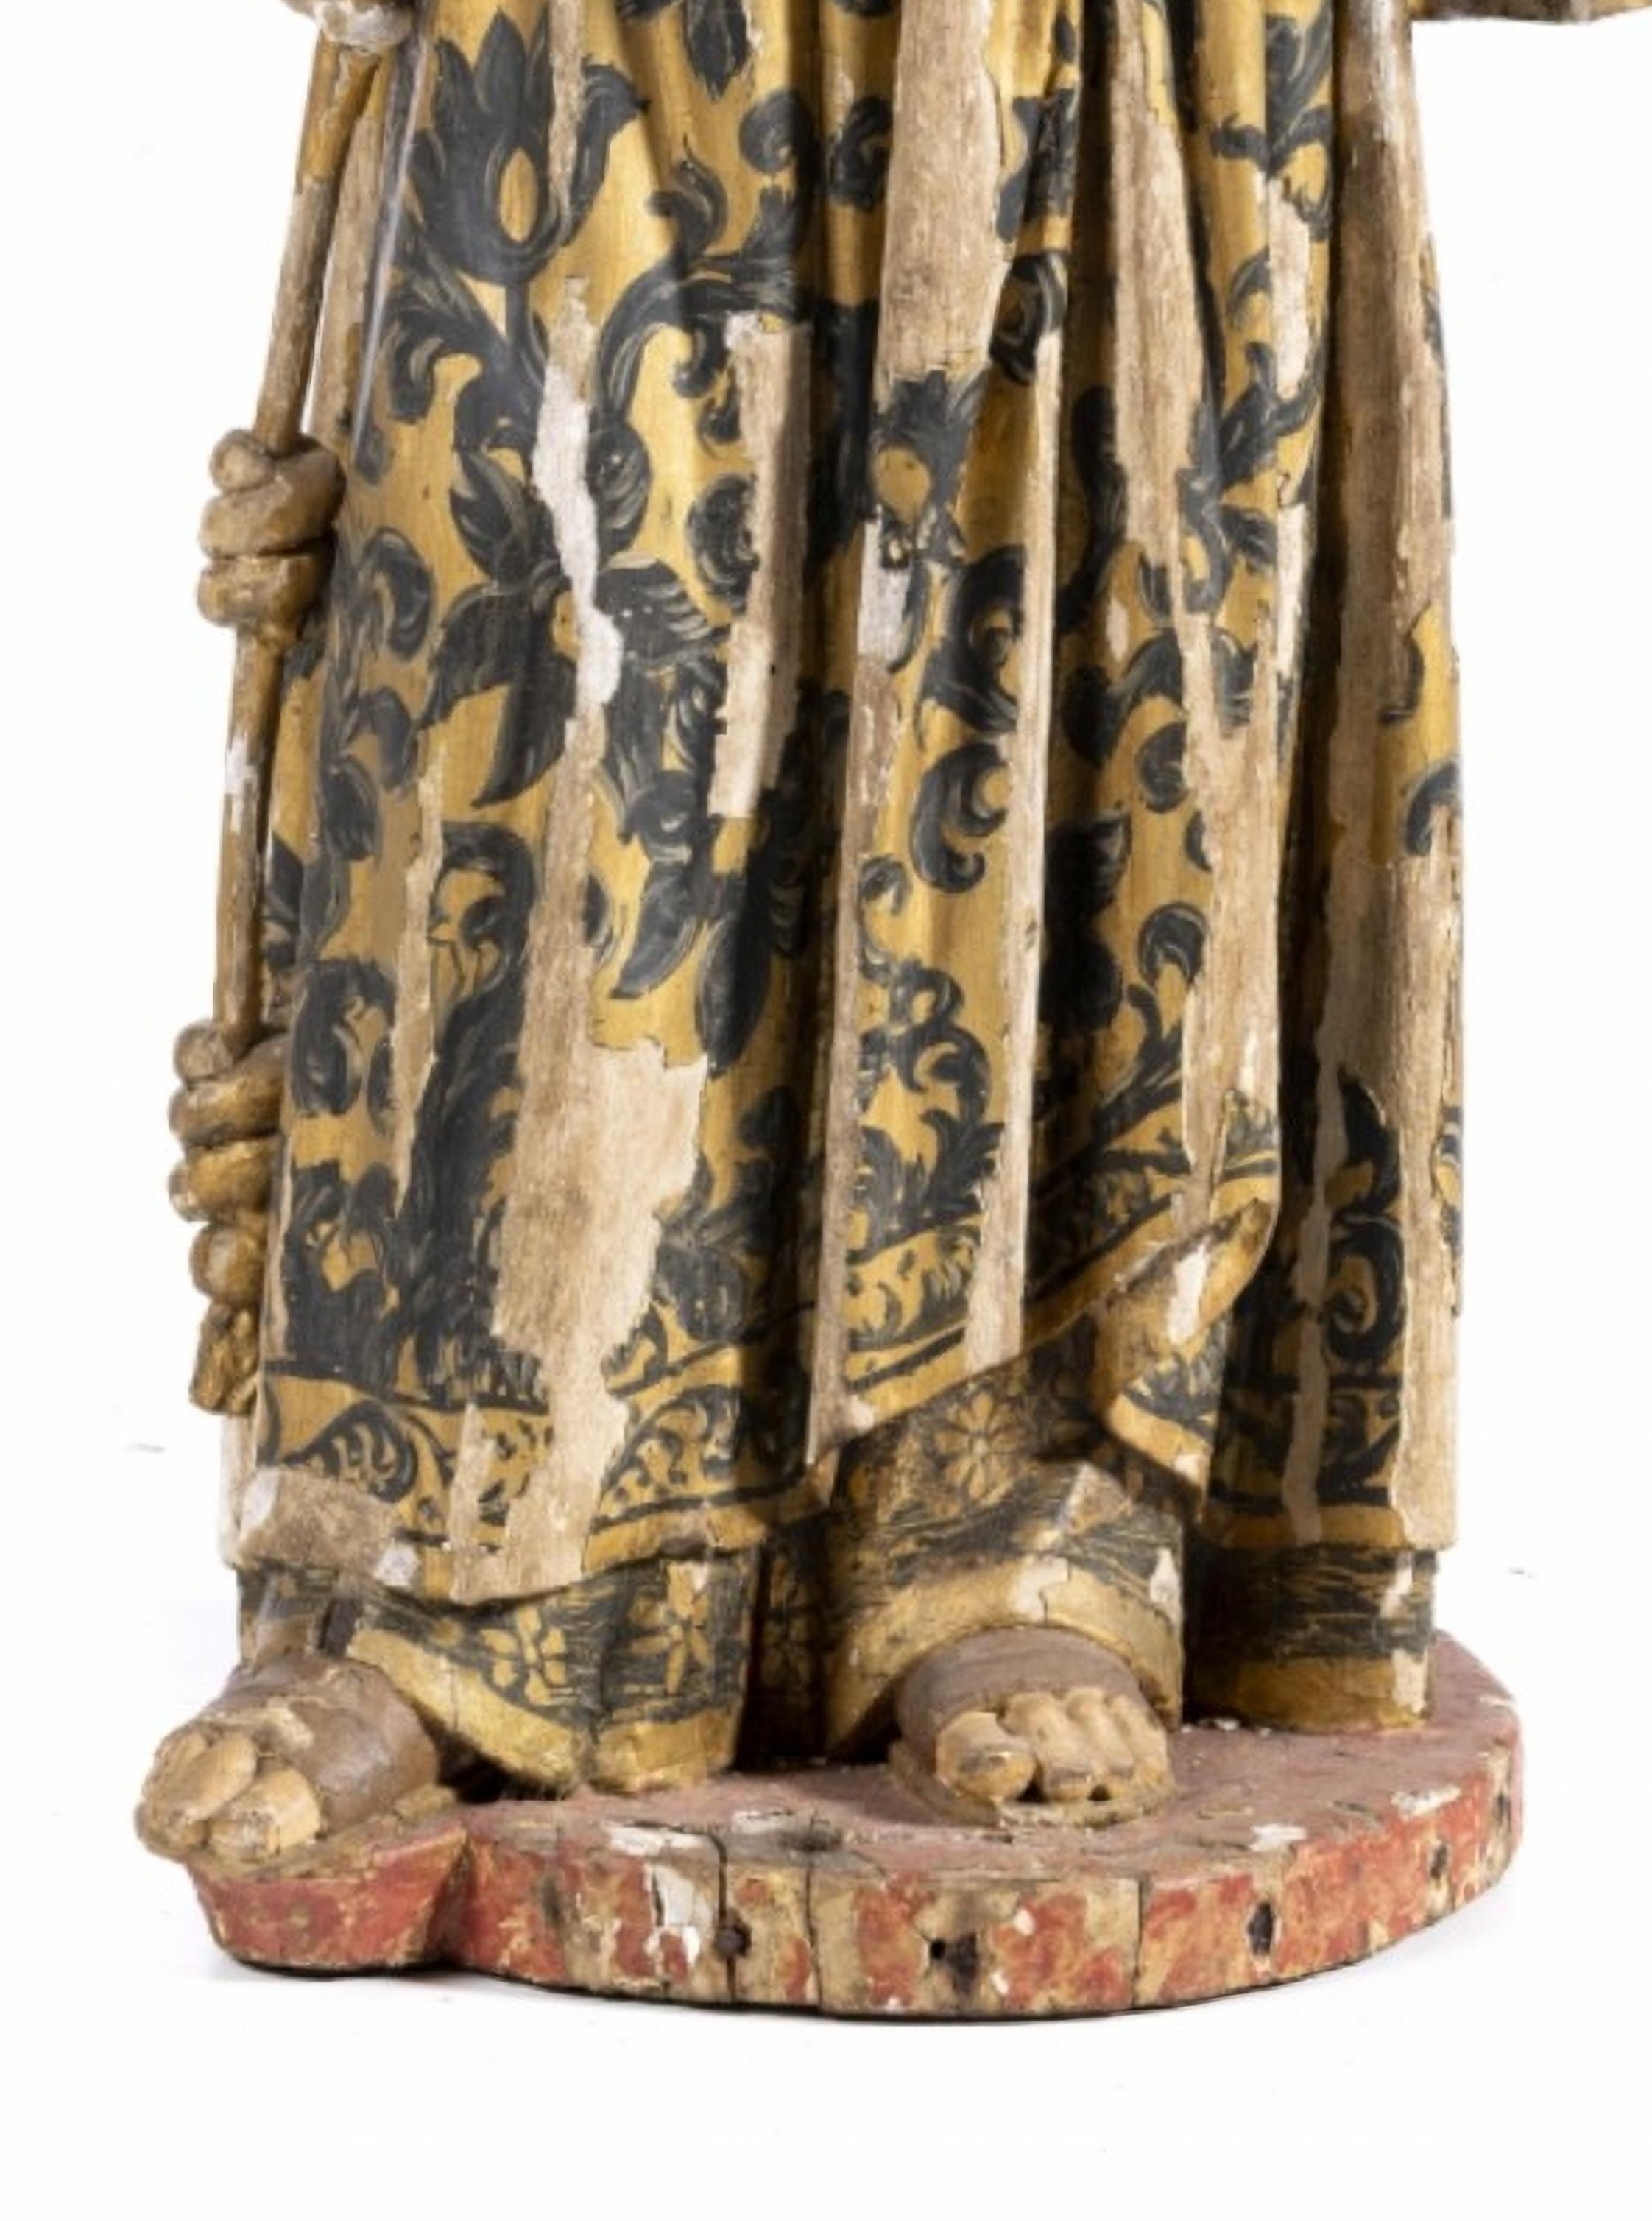 Saint Antony with Child Jesus, 18th century.

Portuguese sculpture in polychrome and gilded wood, from the 17th century.
The figure is represented standing, holding the book with his left hand. 
Missing and defects.
Dimensions: 92 x 42 cm.